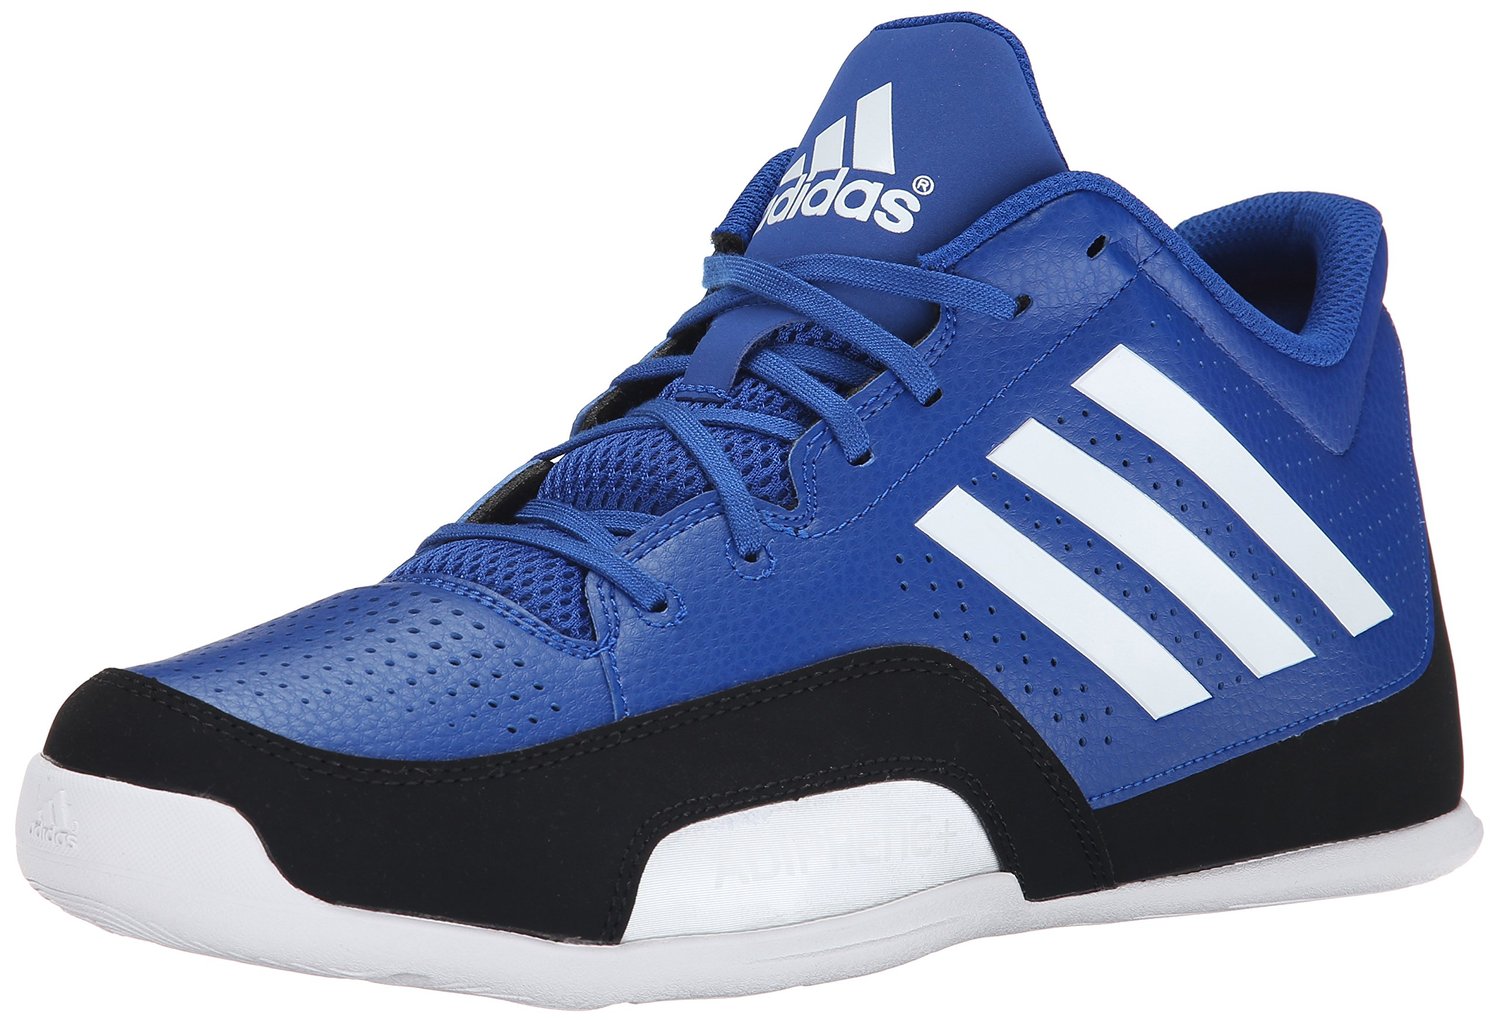 adidas shoes under $50